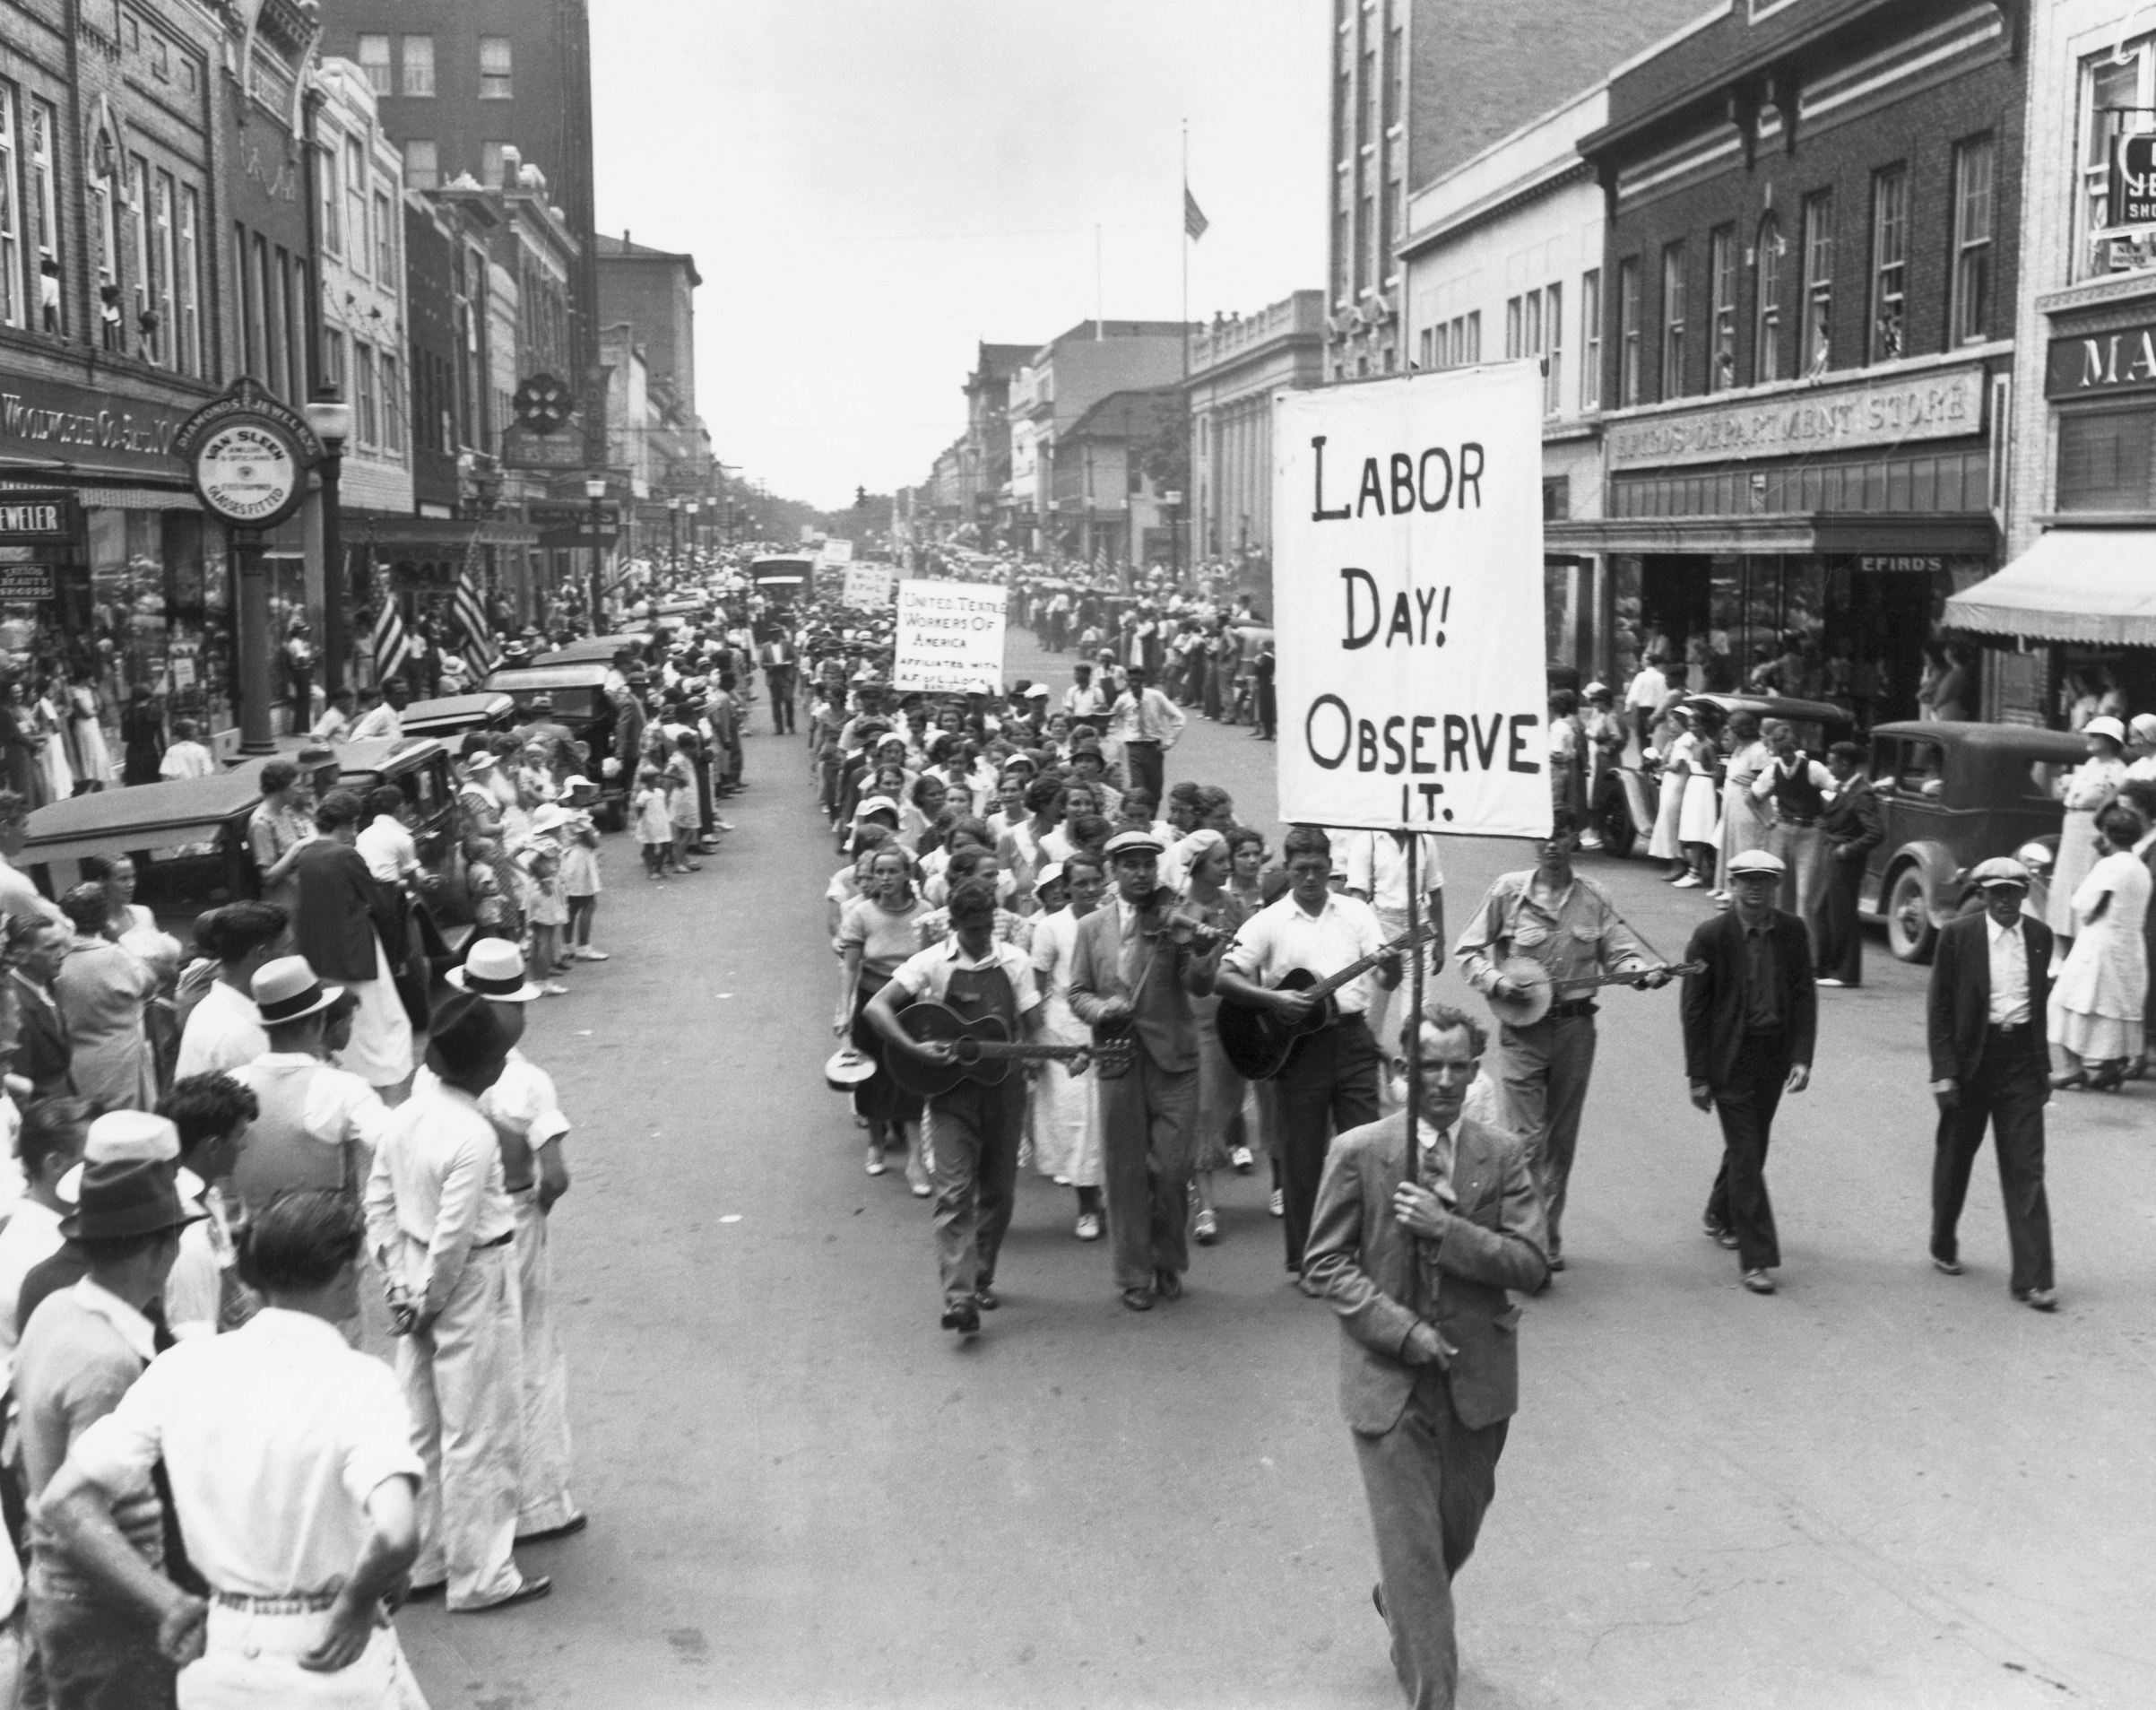 A 1934 Labor Day parade in Gastonia, N.C. (Bettmann/Getty Images)